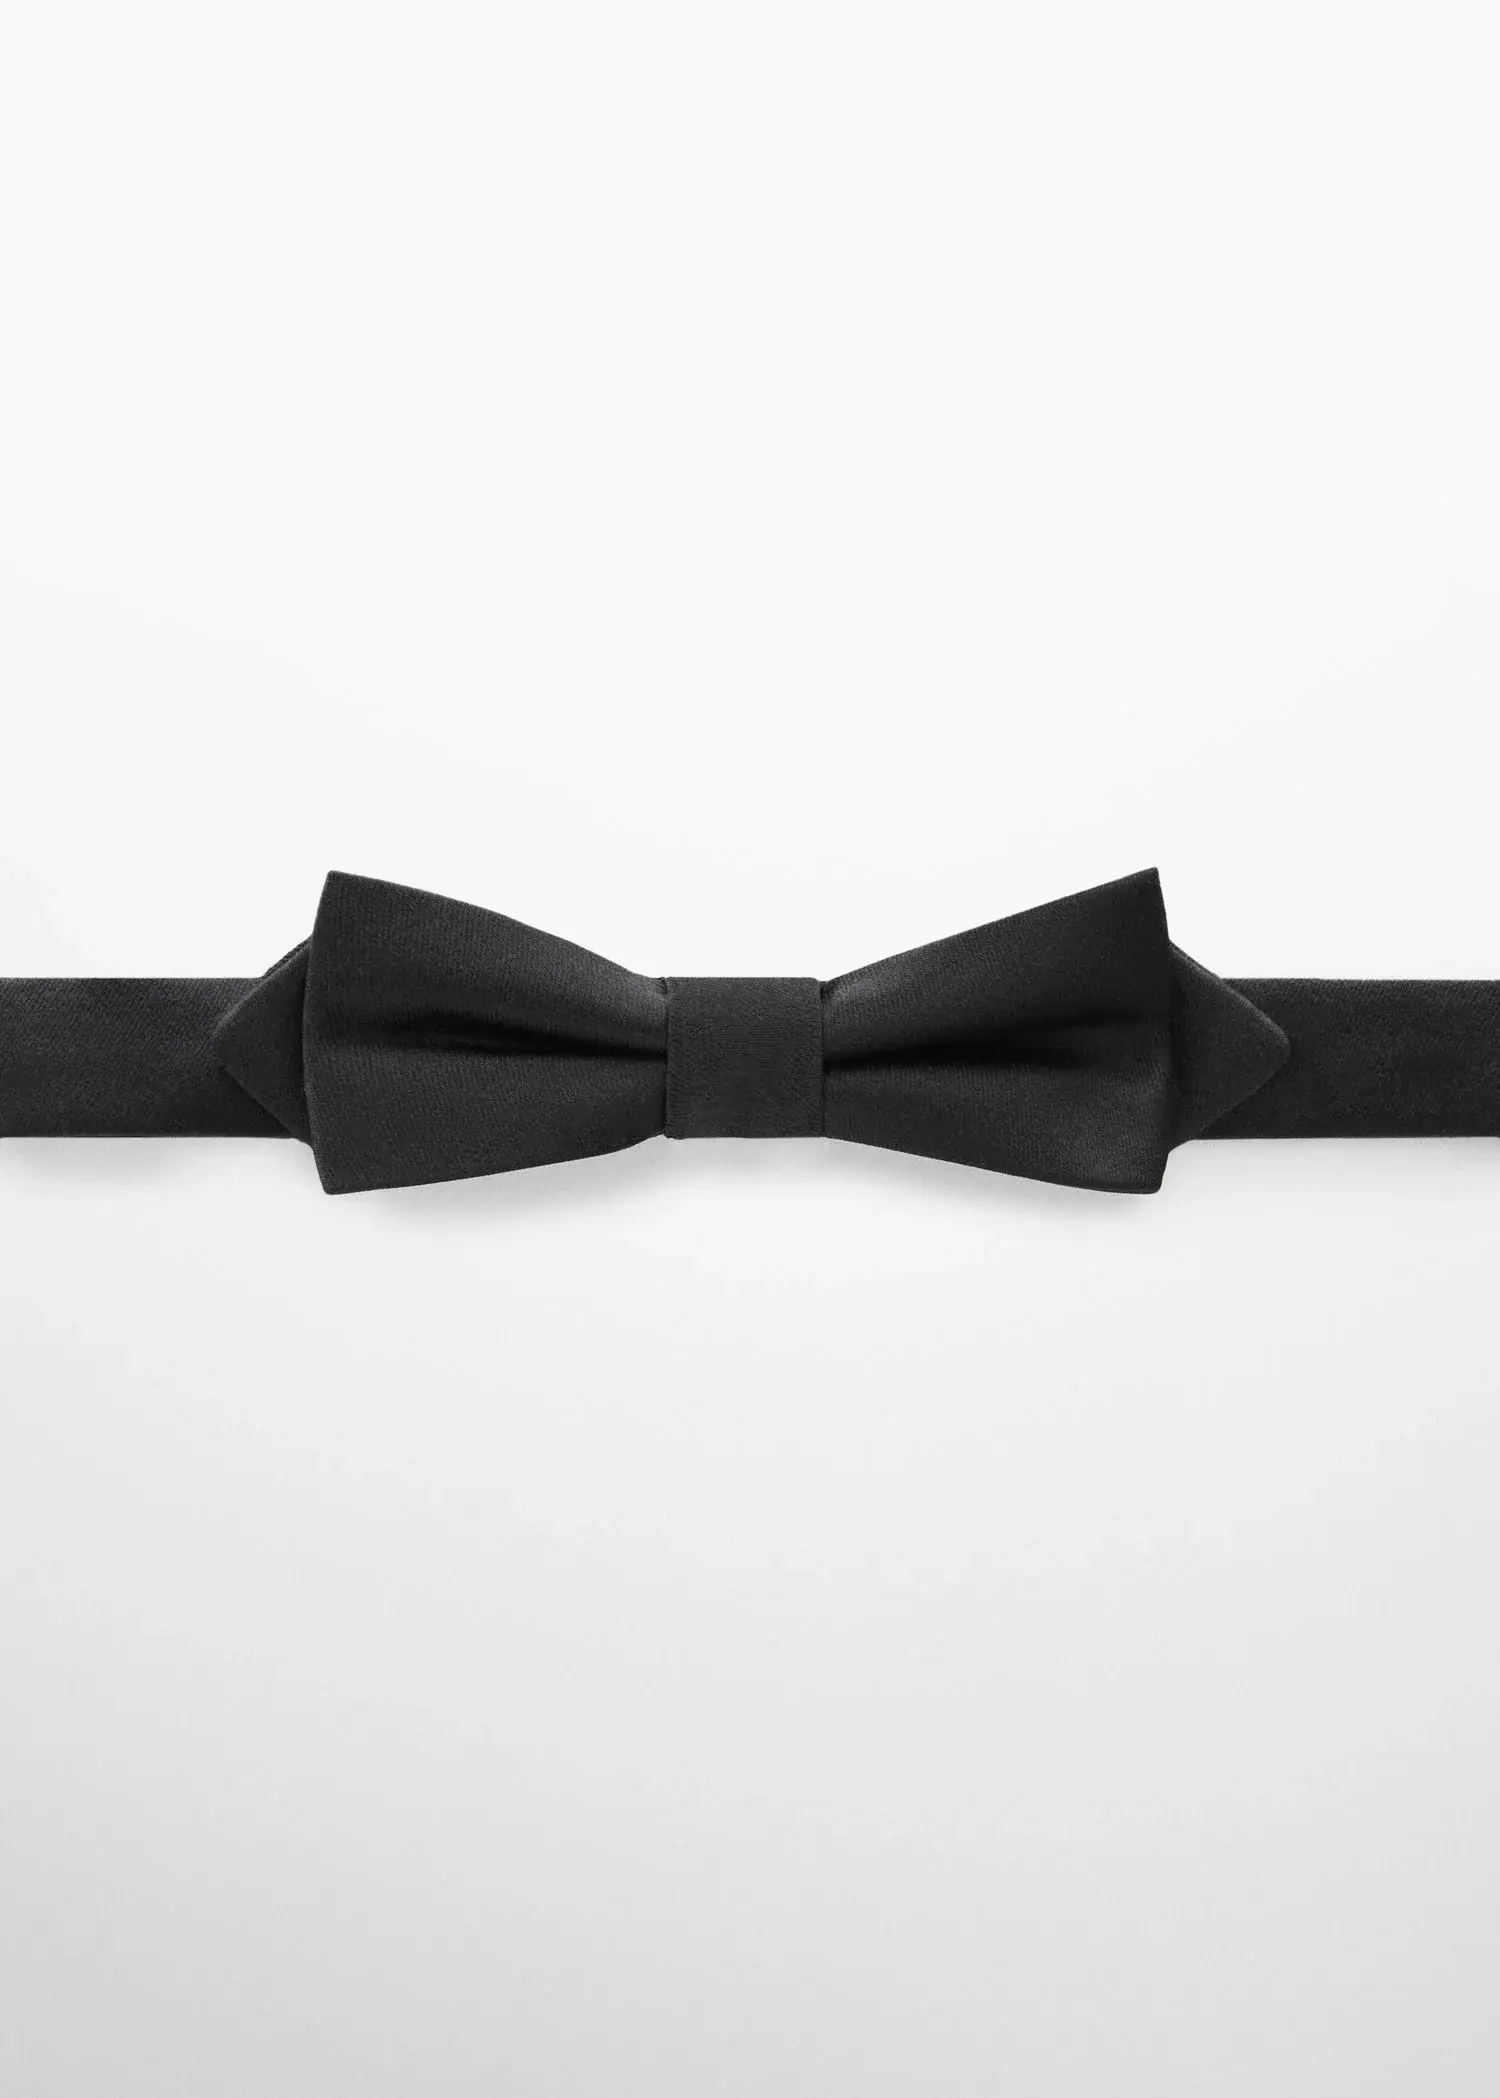 Mango Classic bow tie . a black bow tie on a white background. 